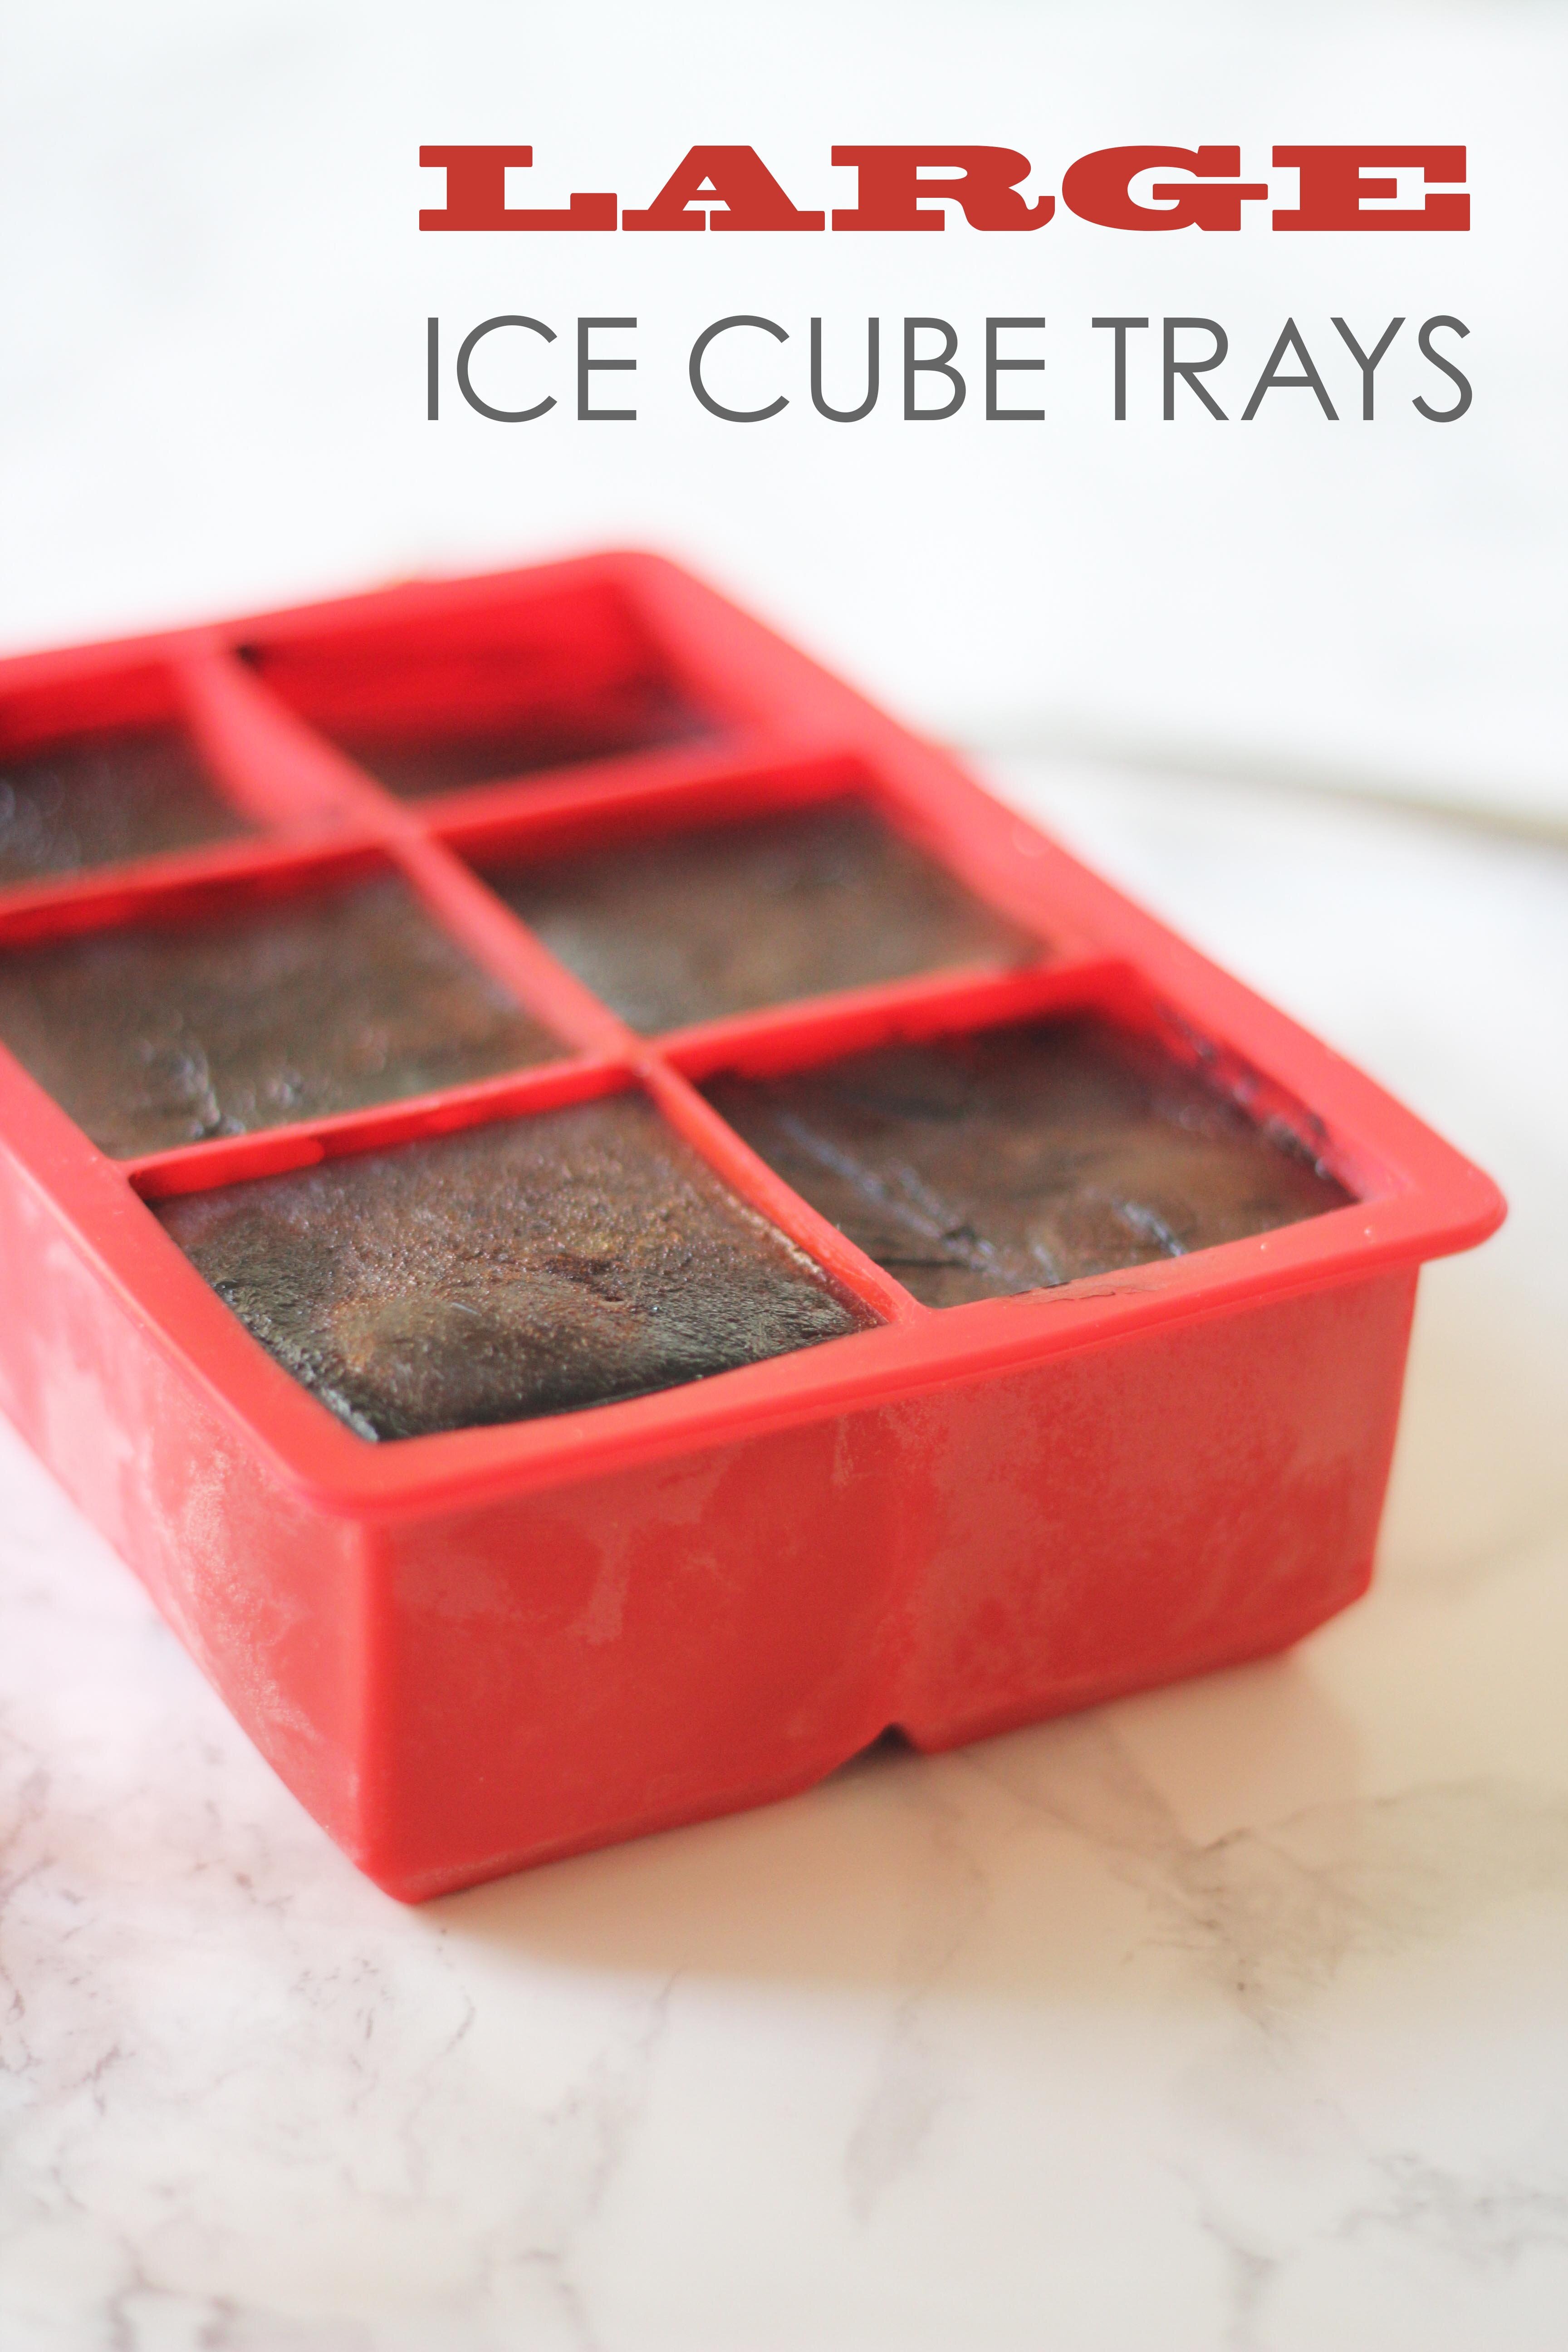 Don't know what to do with your left over coffee? Make Ice cubes! Use the extra large ice trays for big slow melting cubes. Iced Coffee at its Best!